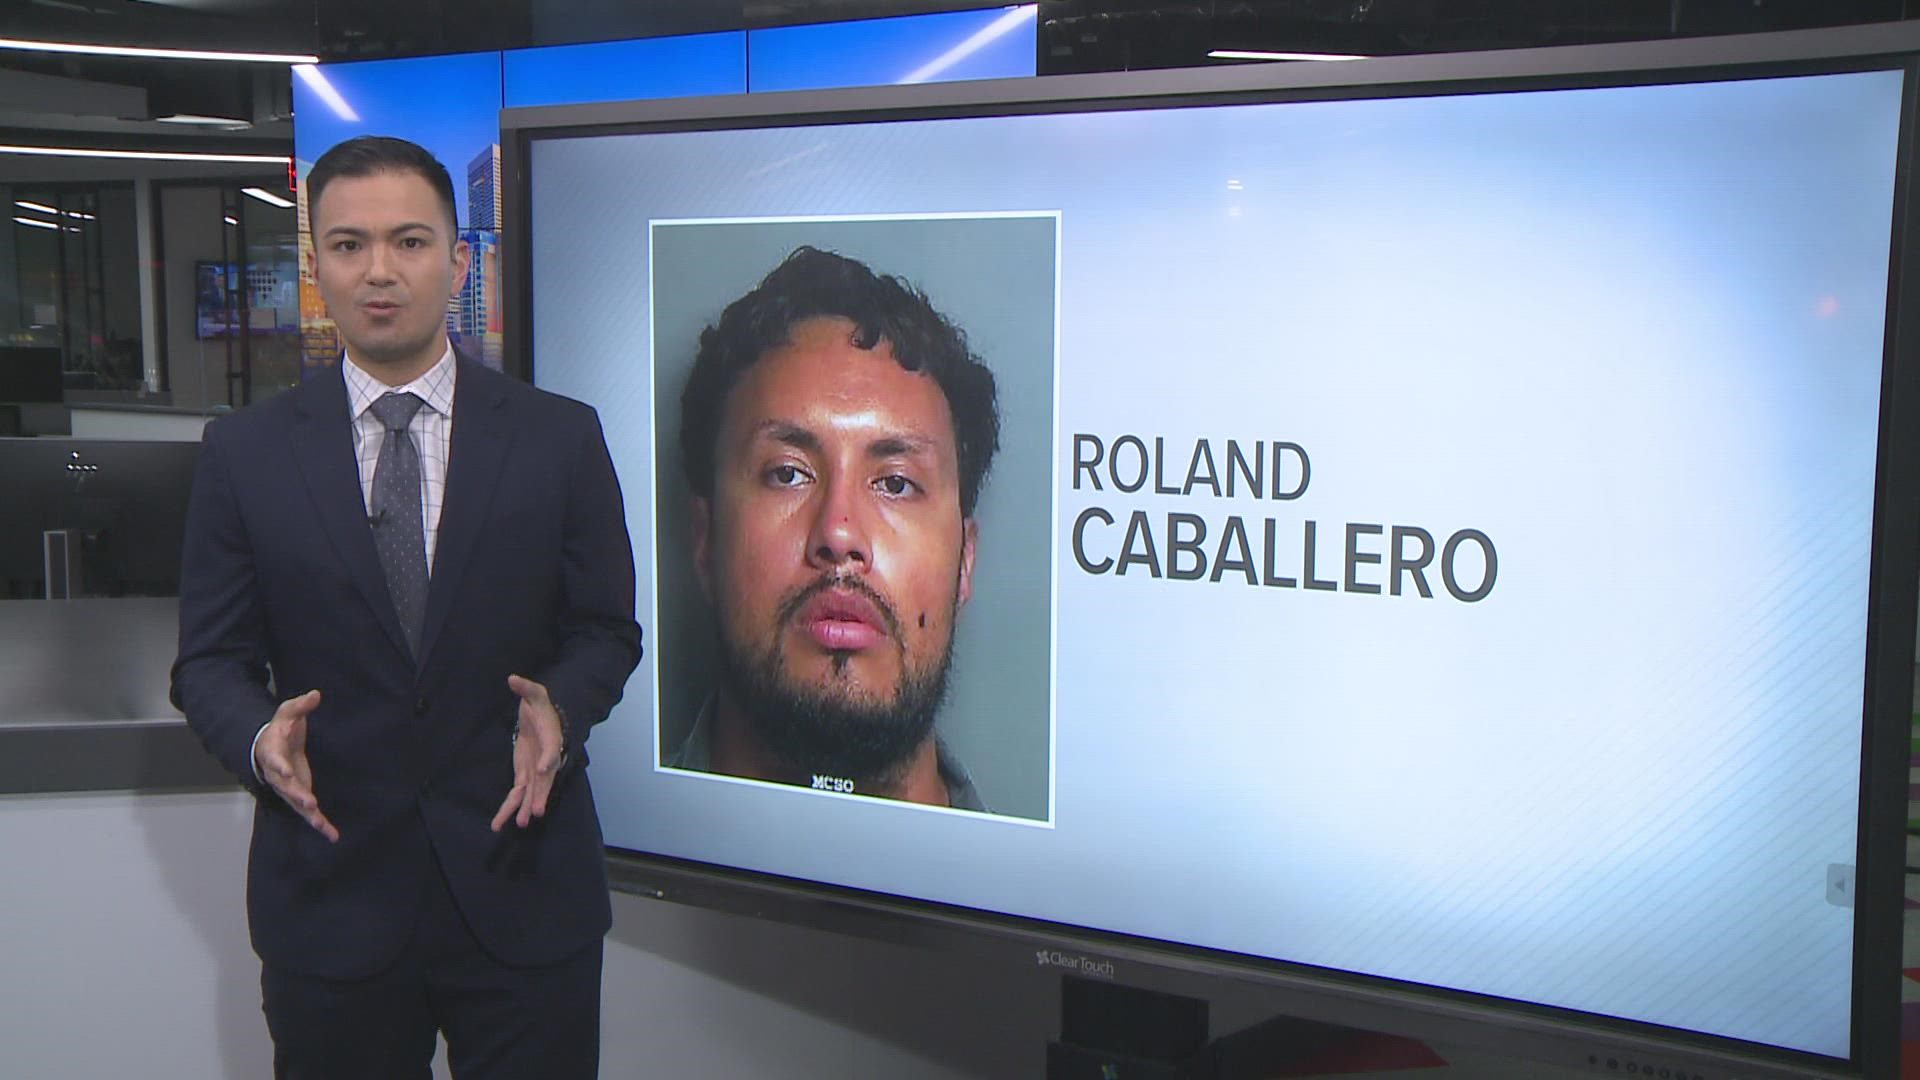 Roland Caballero is accused of shooting and injuring three Houston police officers after a chase in the Third Ward.